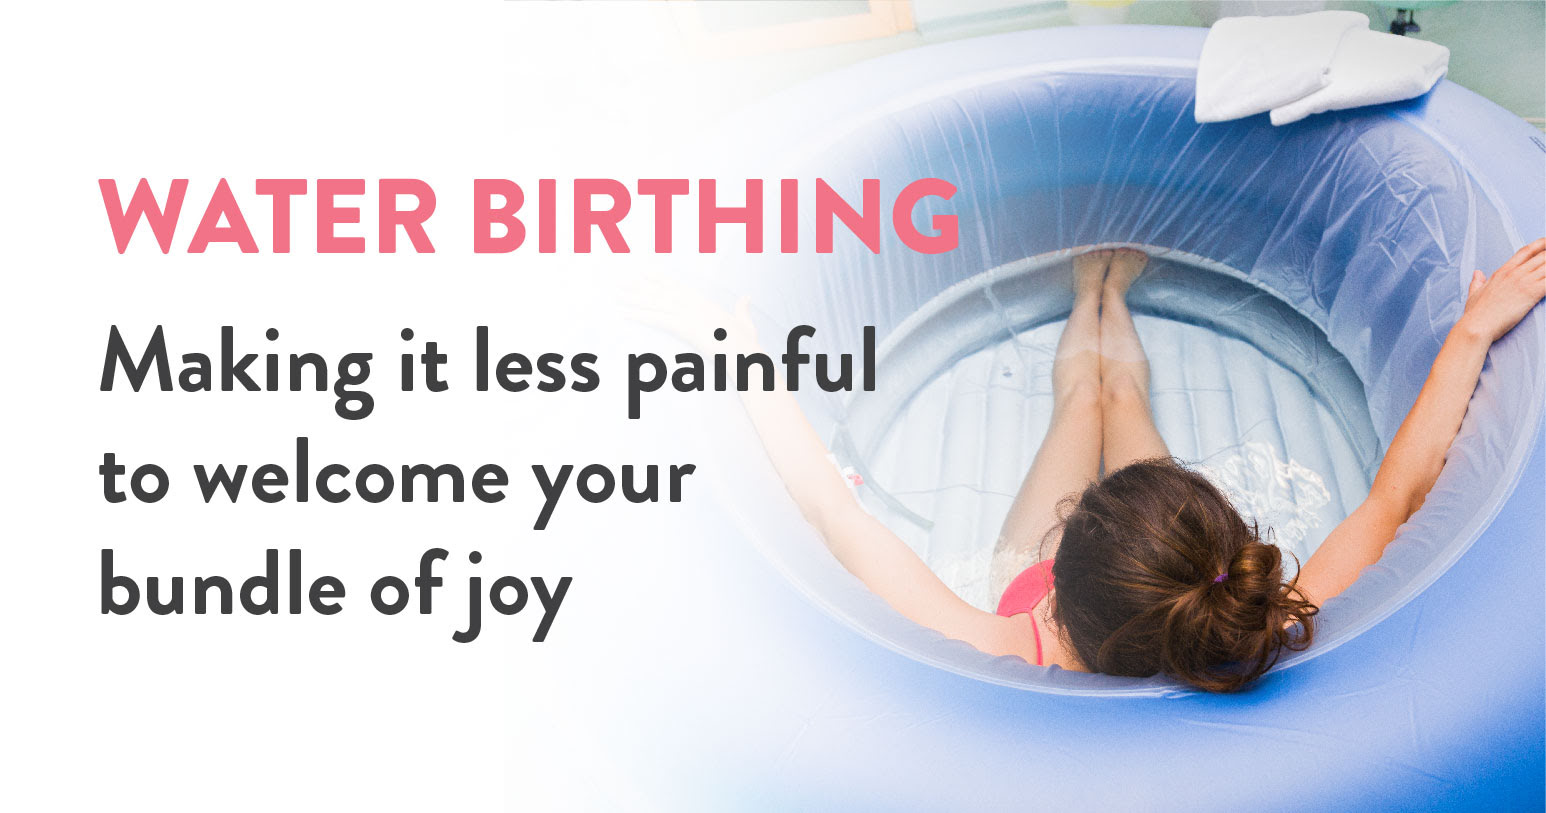 Successful & Less Painful Water Birthing Experience by Dr Deepika Aggarwal